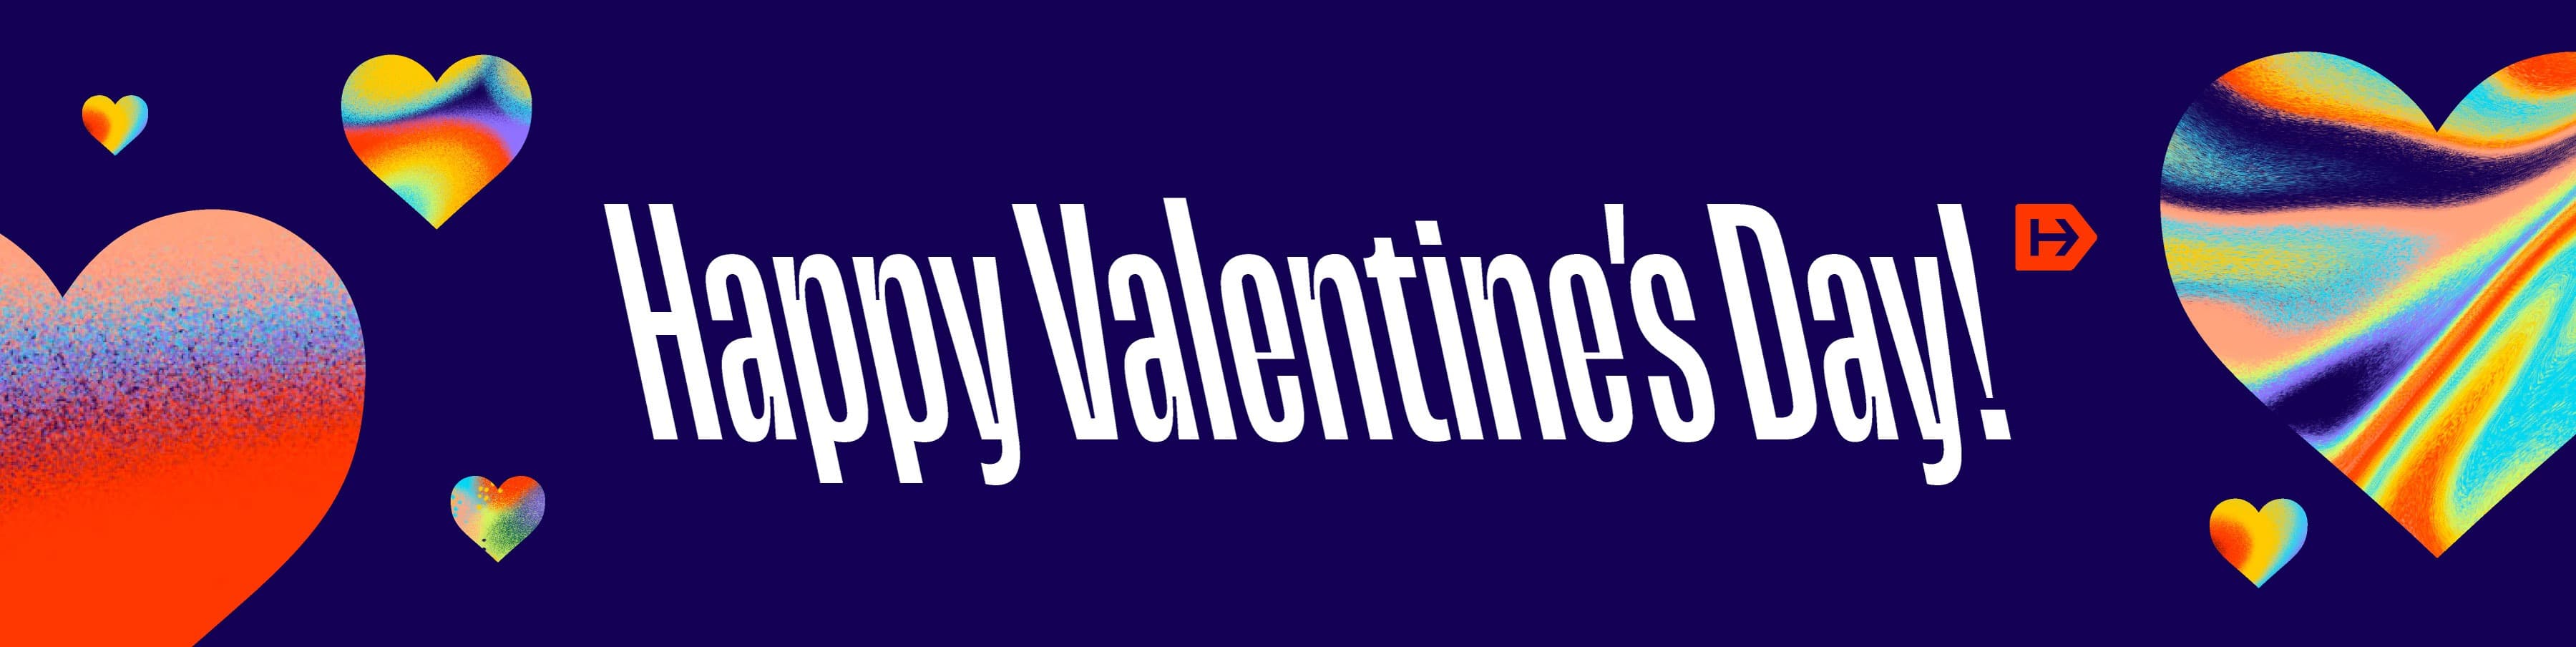 A colorful "Happy Valentine's Day!" banner with large white text on a dark blue background. Surrounding the text are variously sized, multi-colored, gradient hearts, creating a festive and vibrant design.